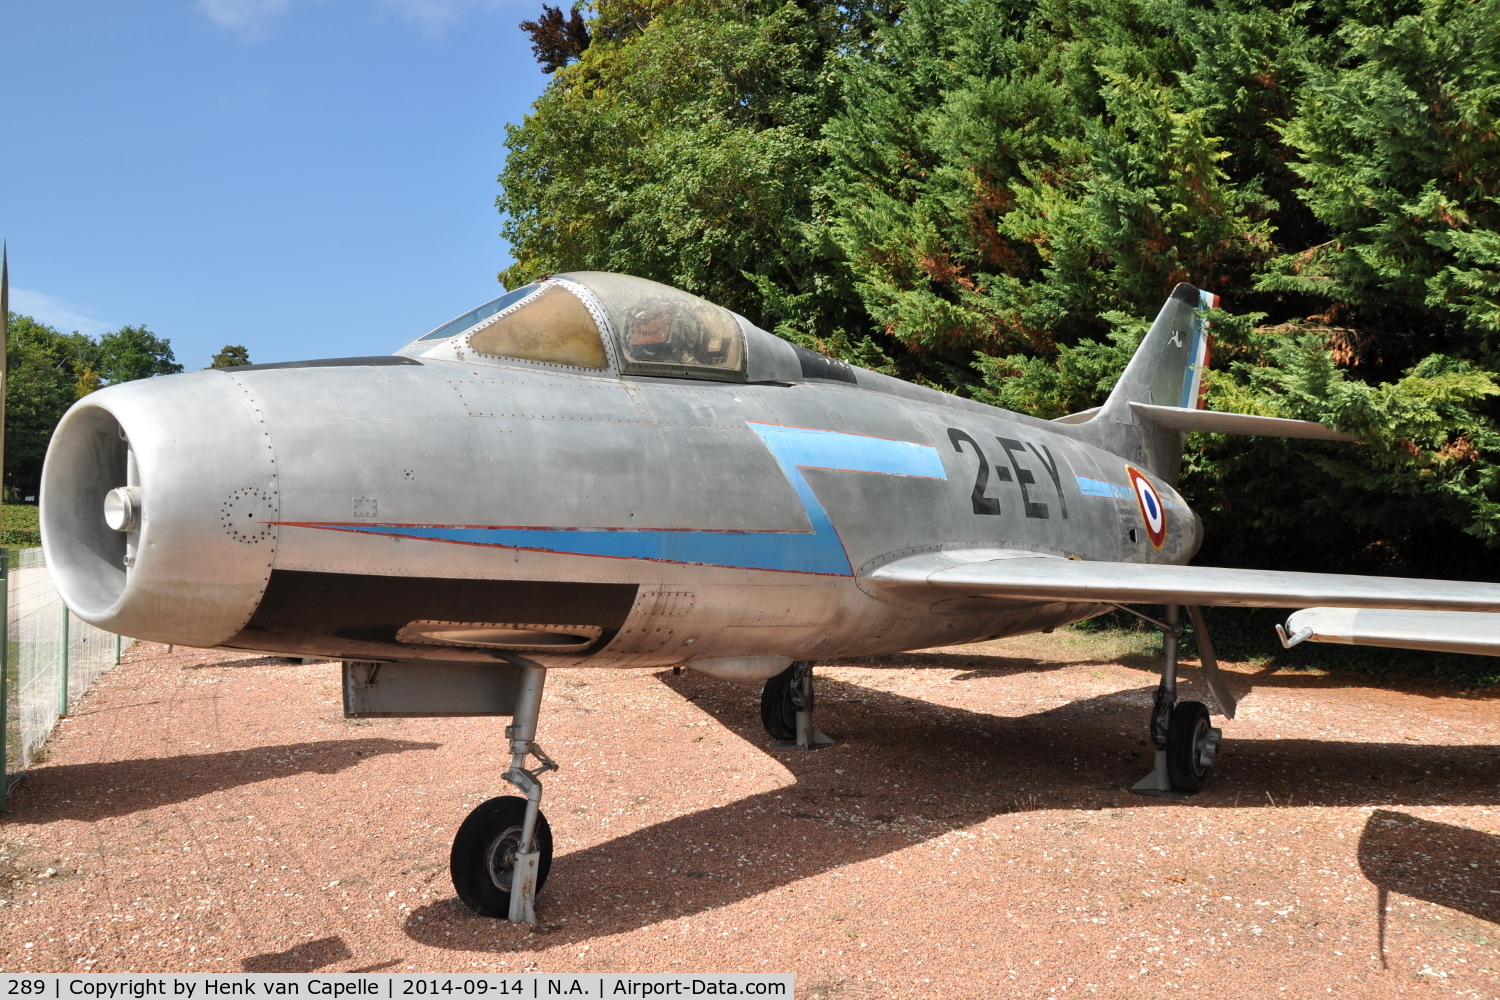 289, Dassault Mystere IVA C/N 289, Mystère IVA fighter-bomber of the French Air Force at the Chateau de Savigny aircraft museum.